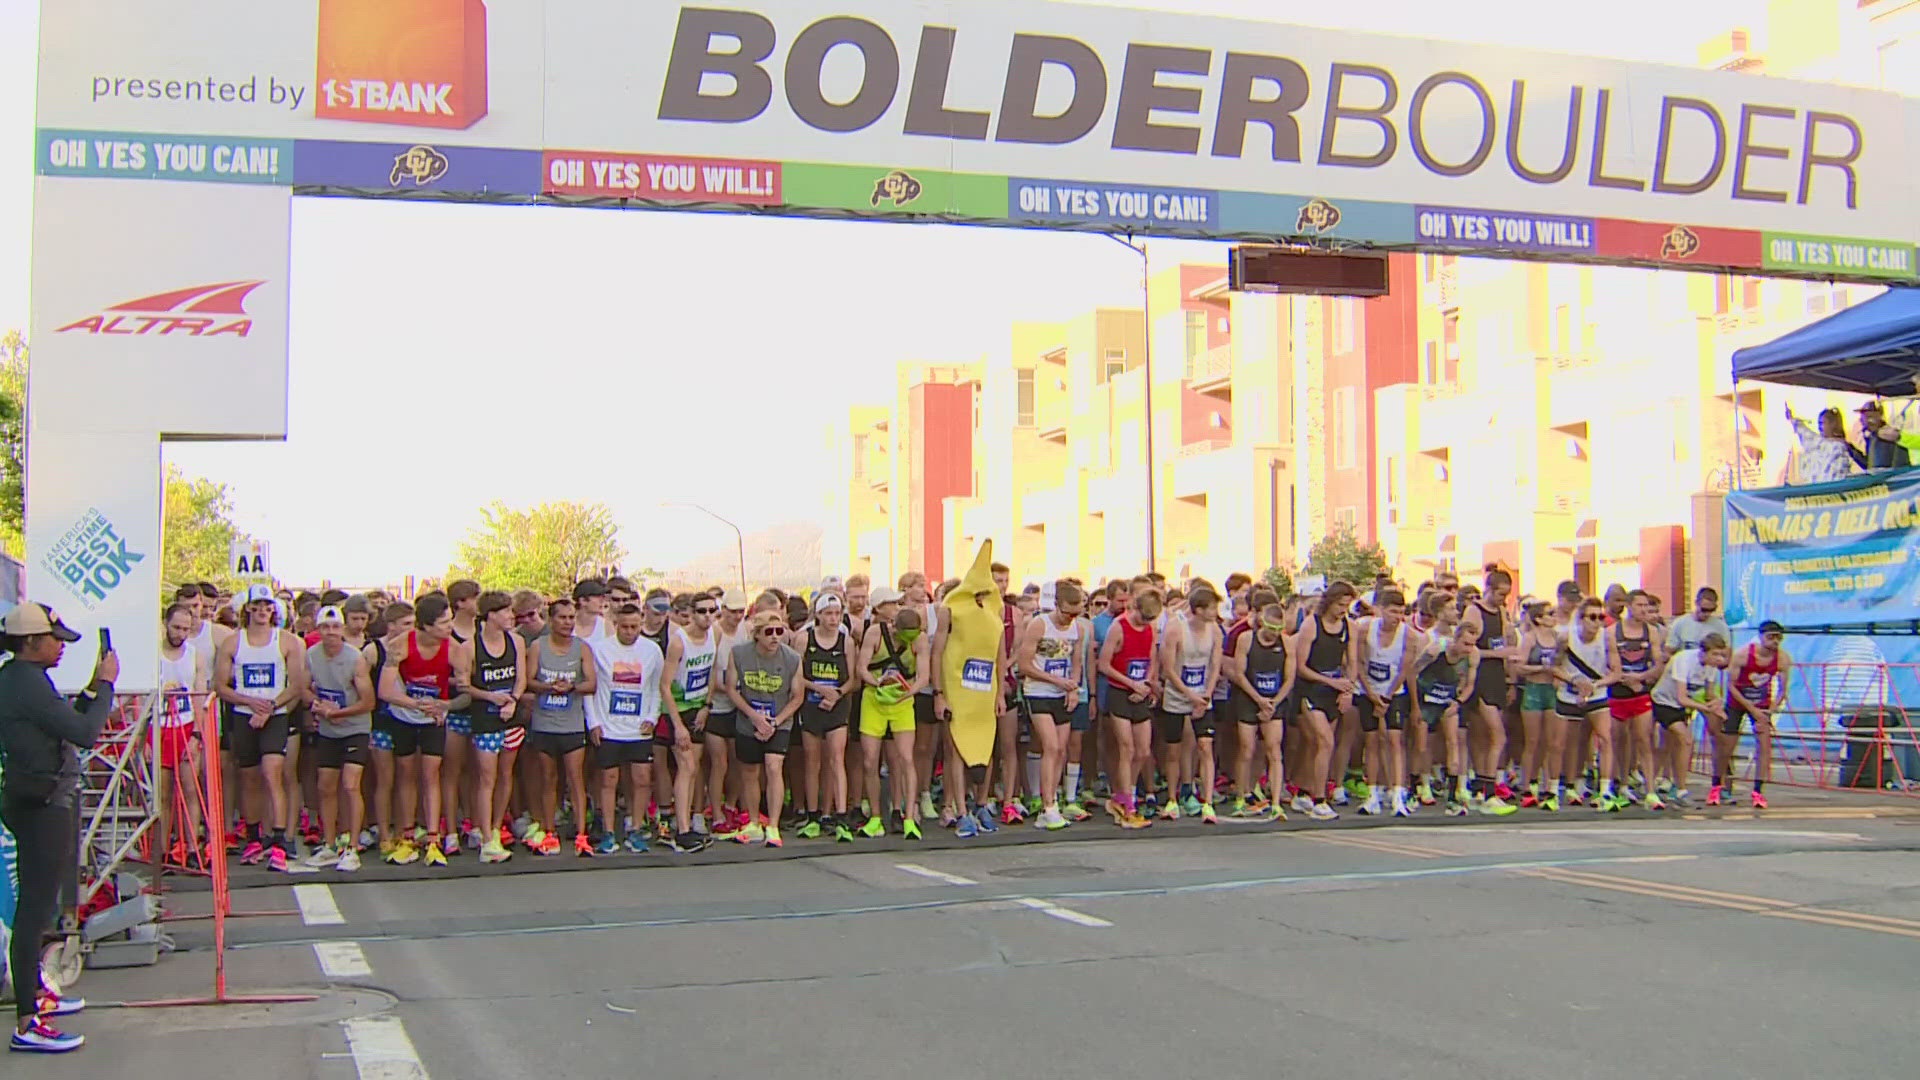 Runners from around the world converge on Boulder for "America's Best All-Time 10K".